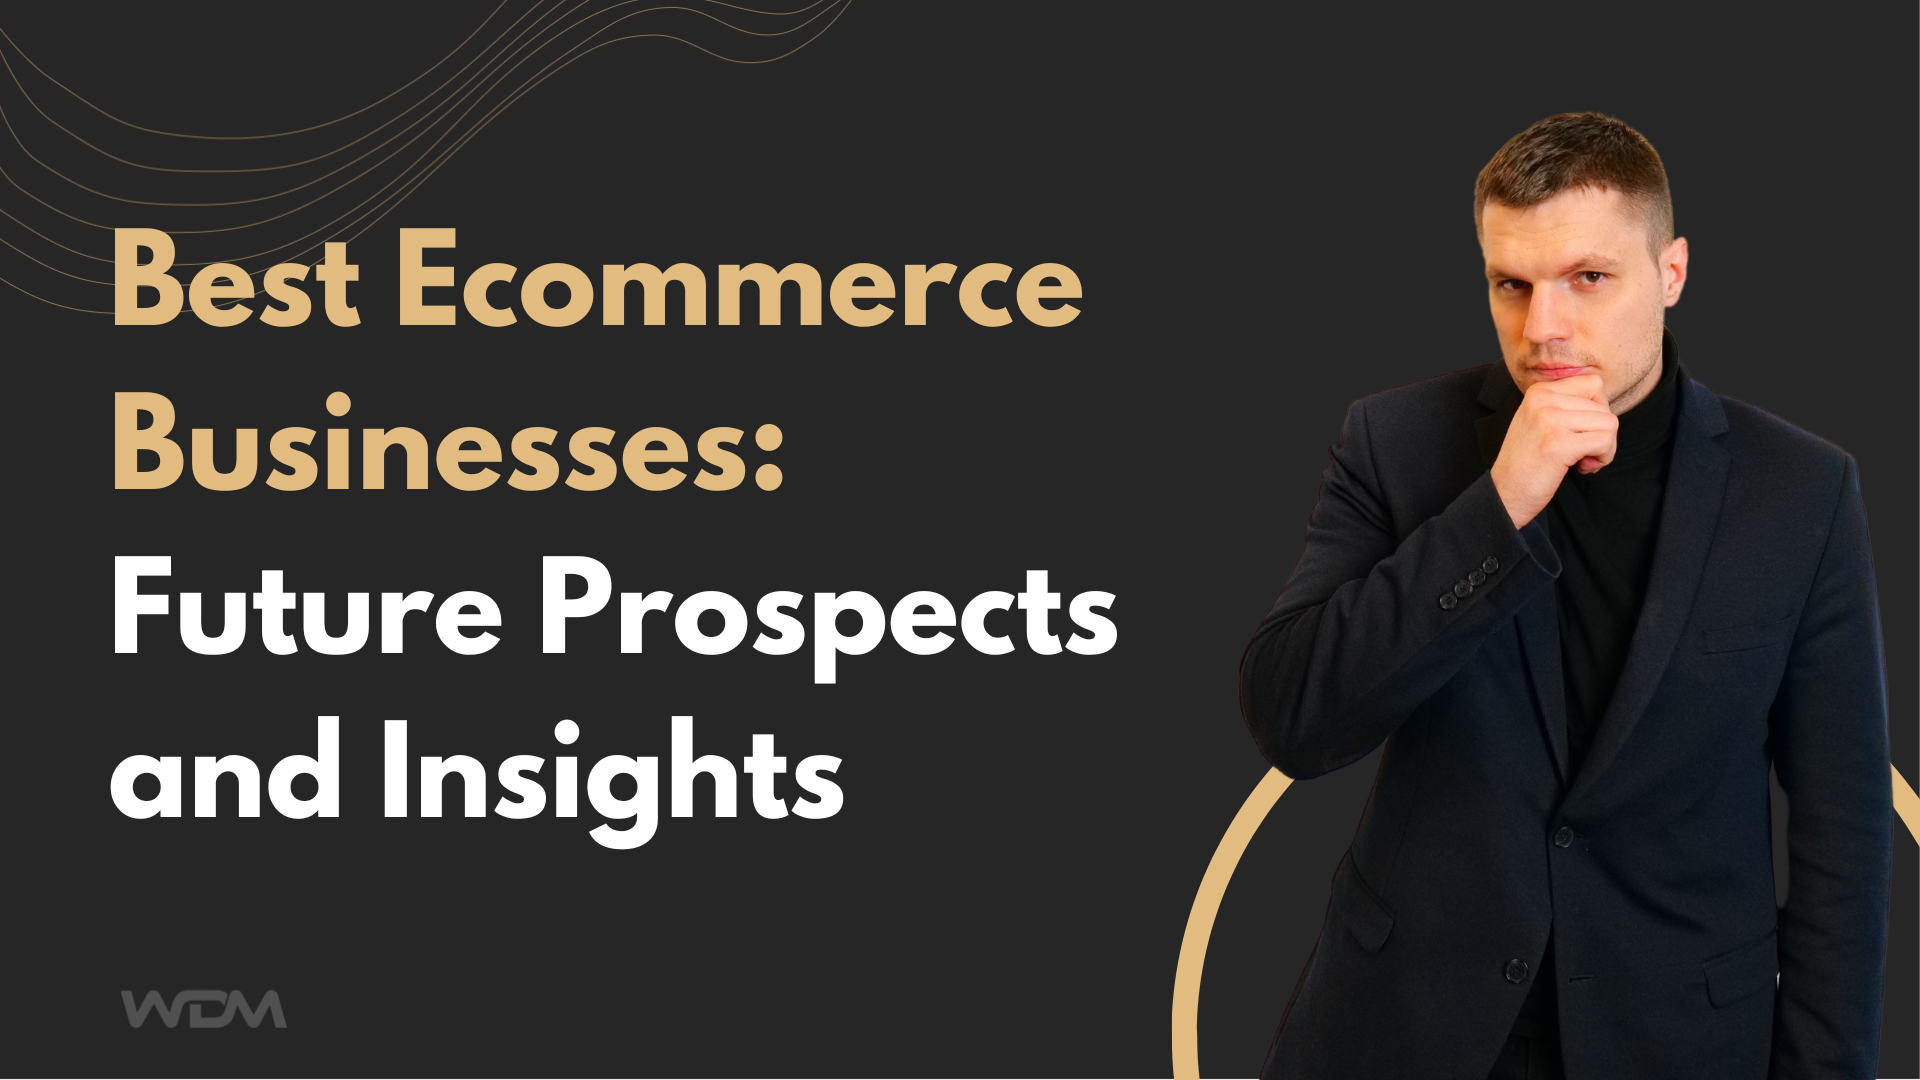 Best Ecommerce Business